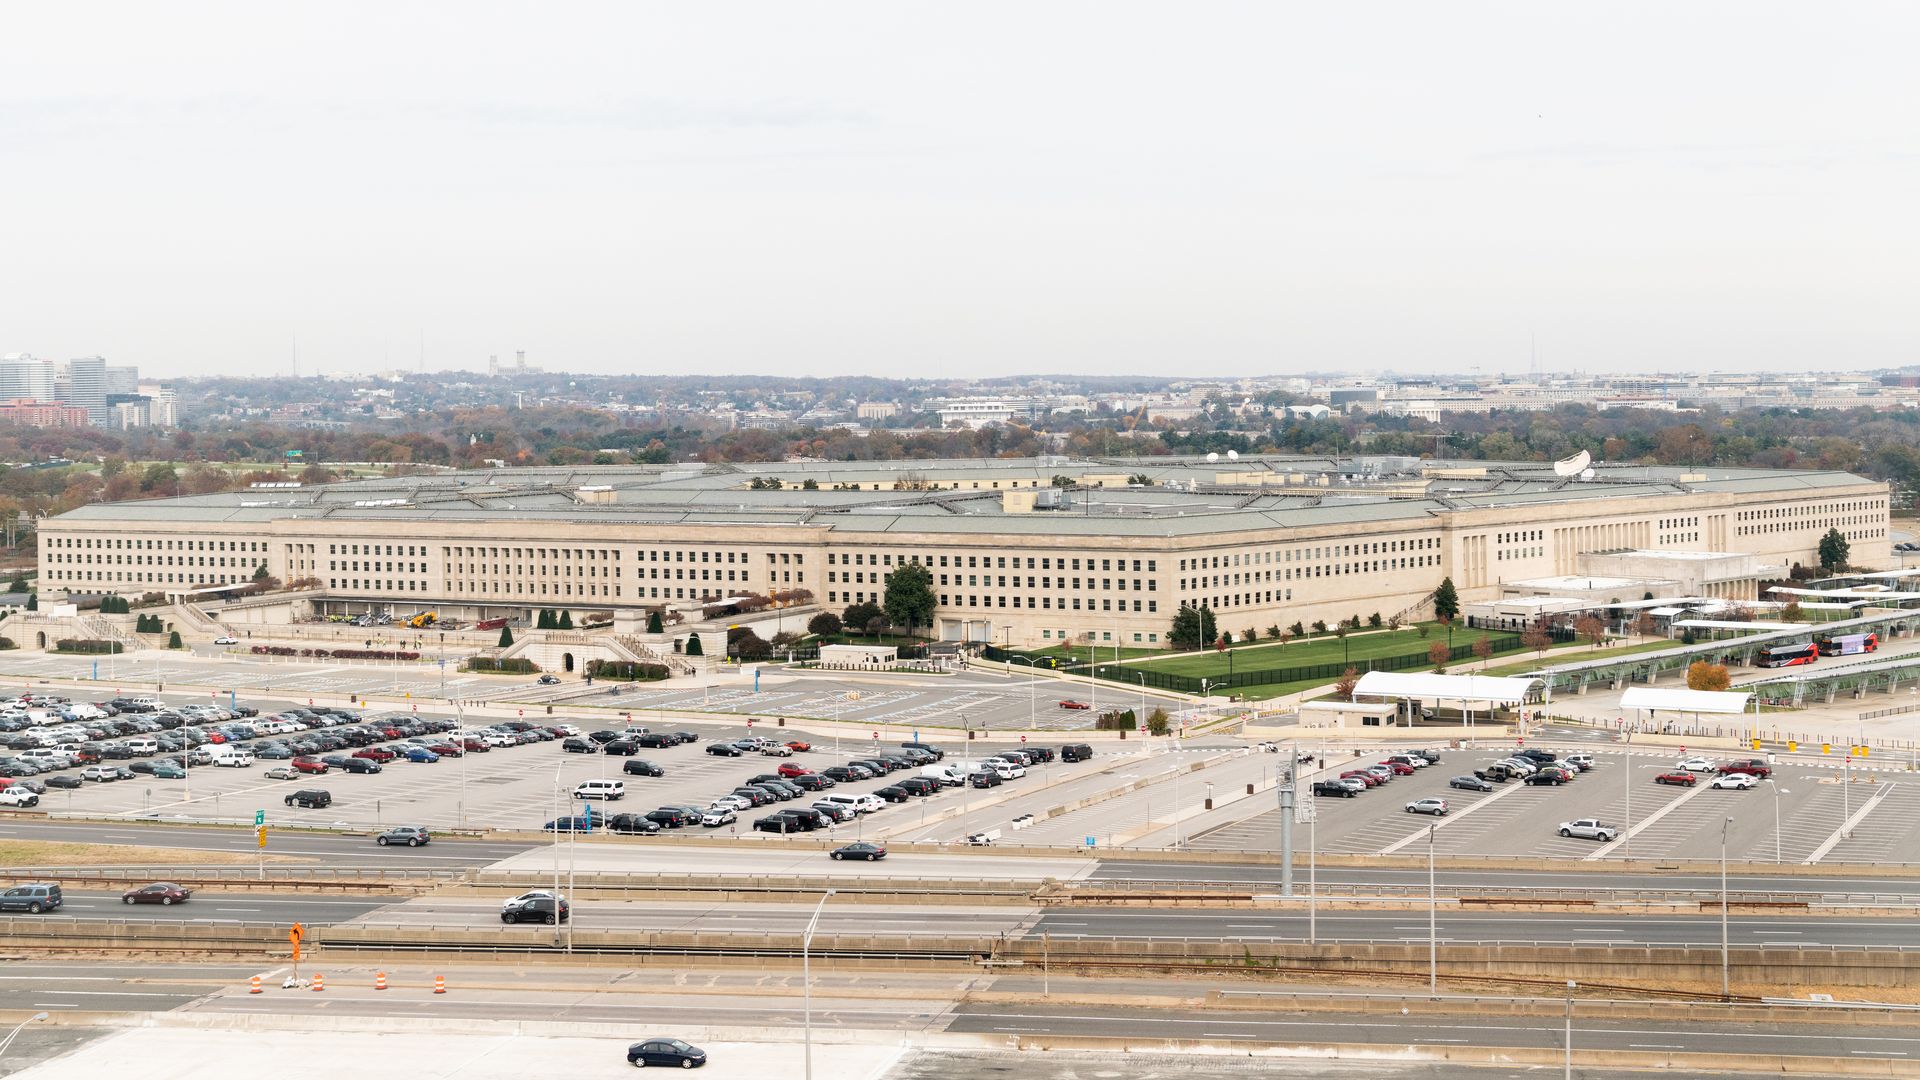 The Pentagon building from afar